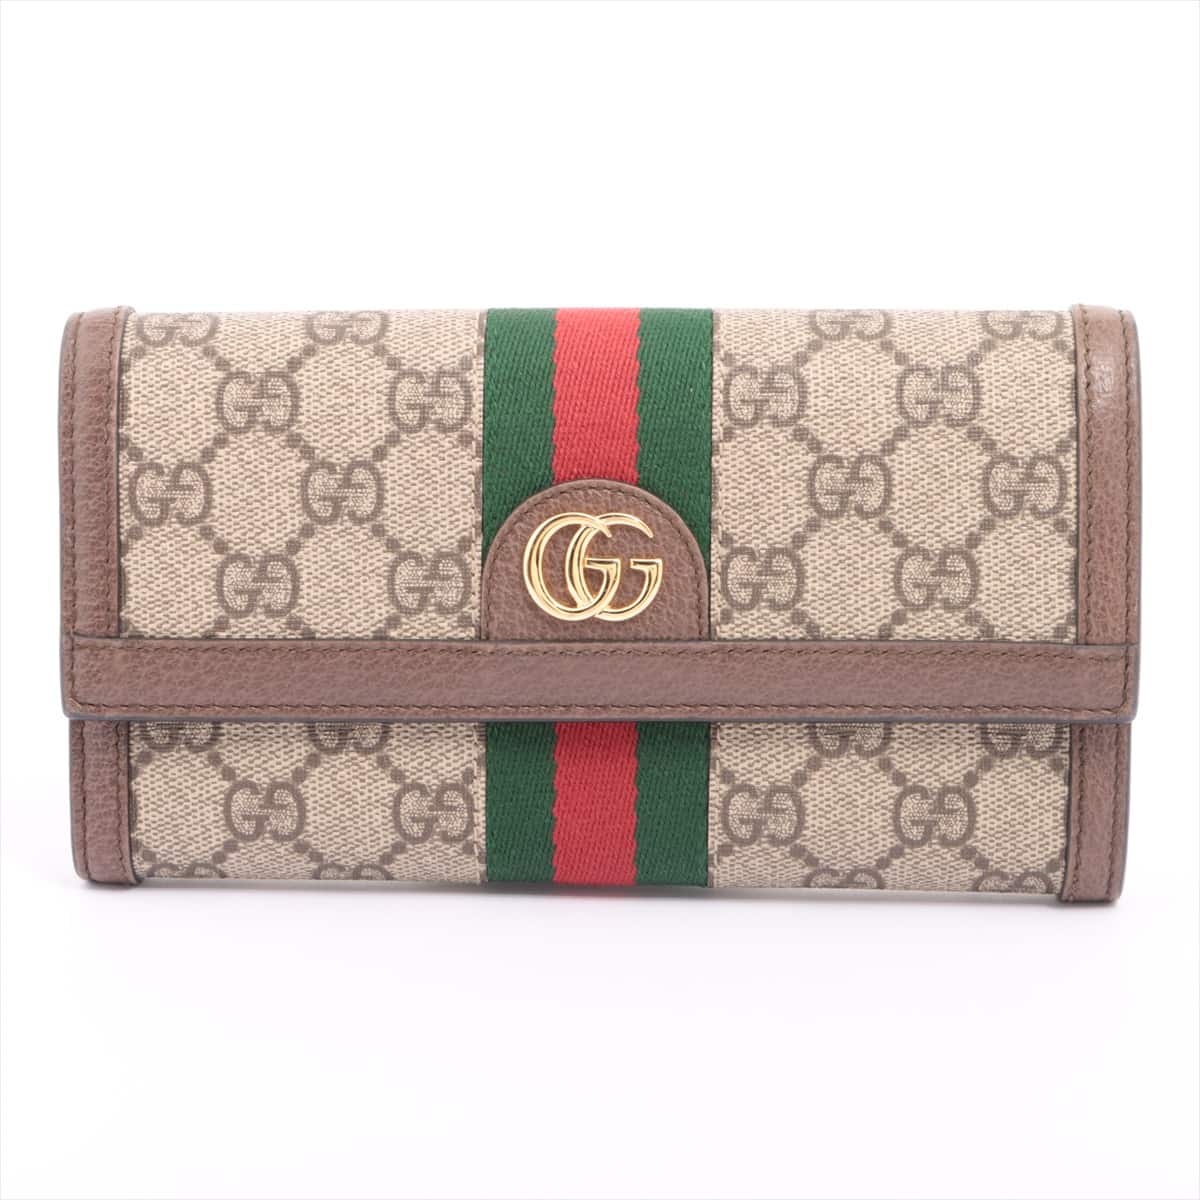 Gucci GG Marmont Ophidia 523153 PVC & leather Wallet Beige